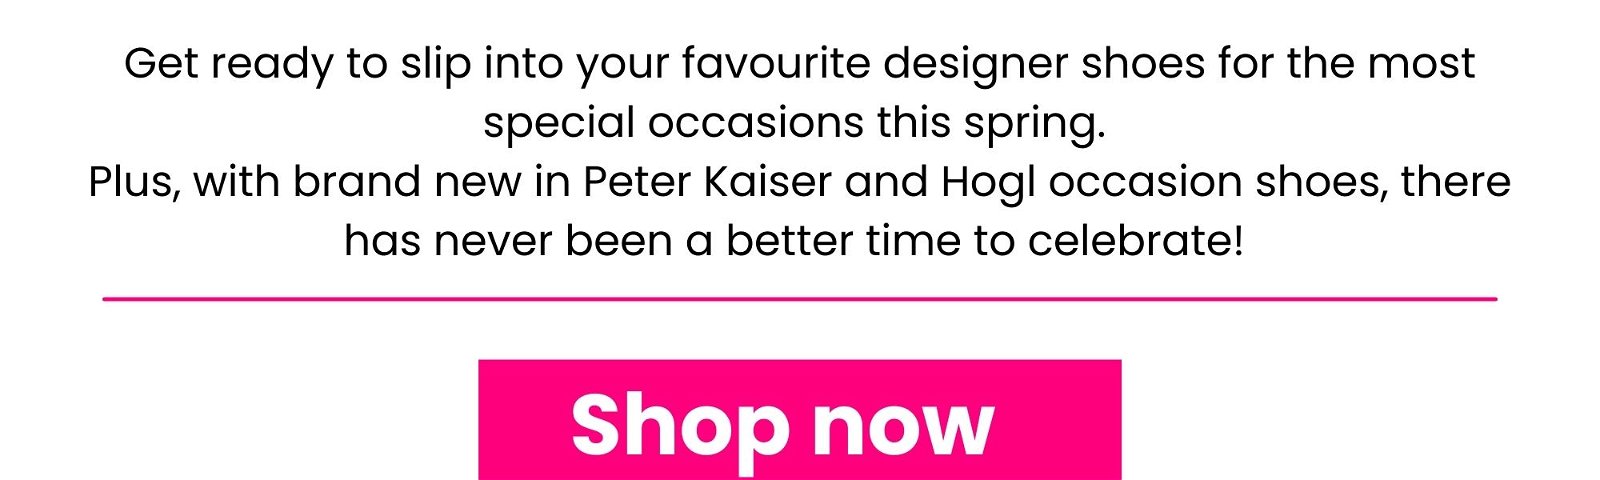 Mozimo high heels and sling backs from Peter Kasier and Hogl